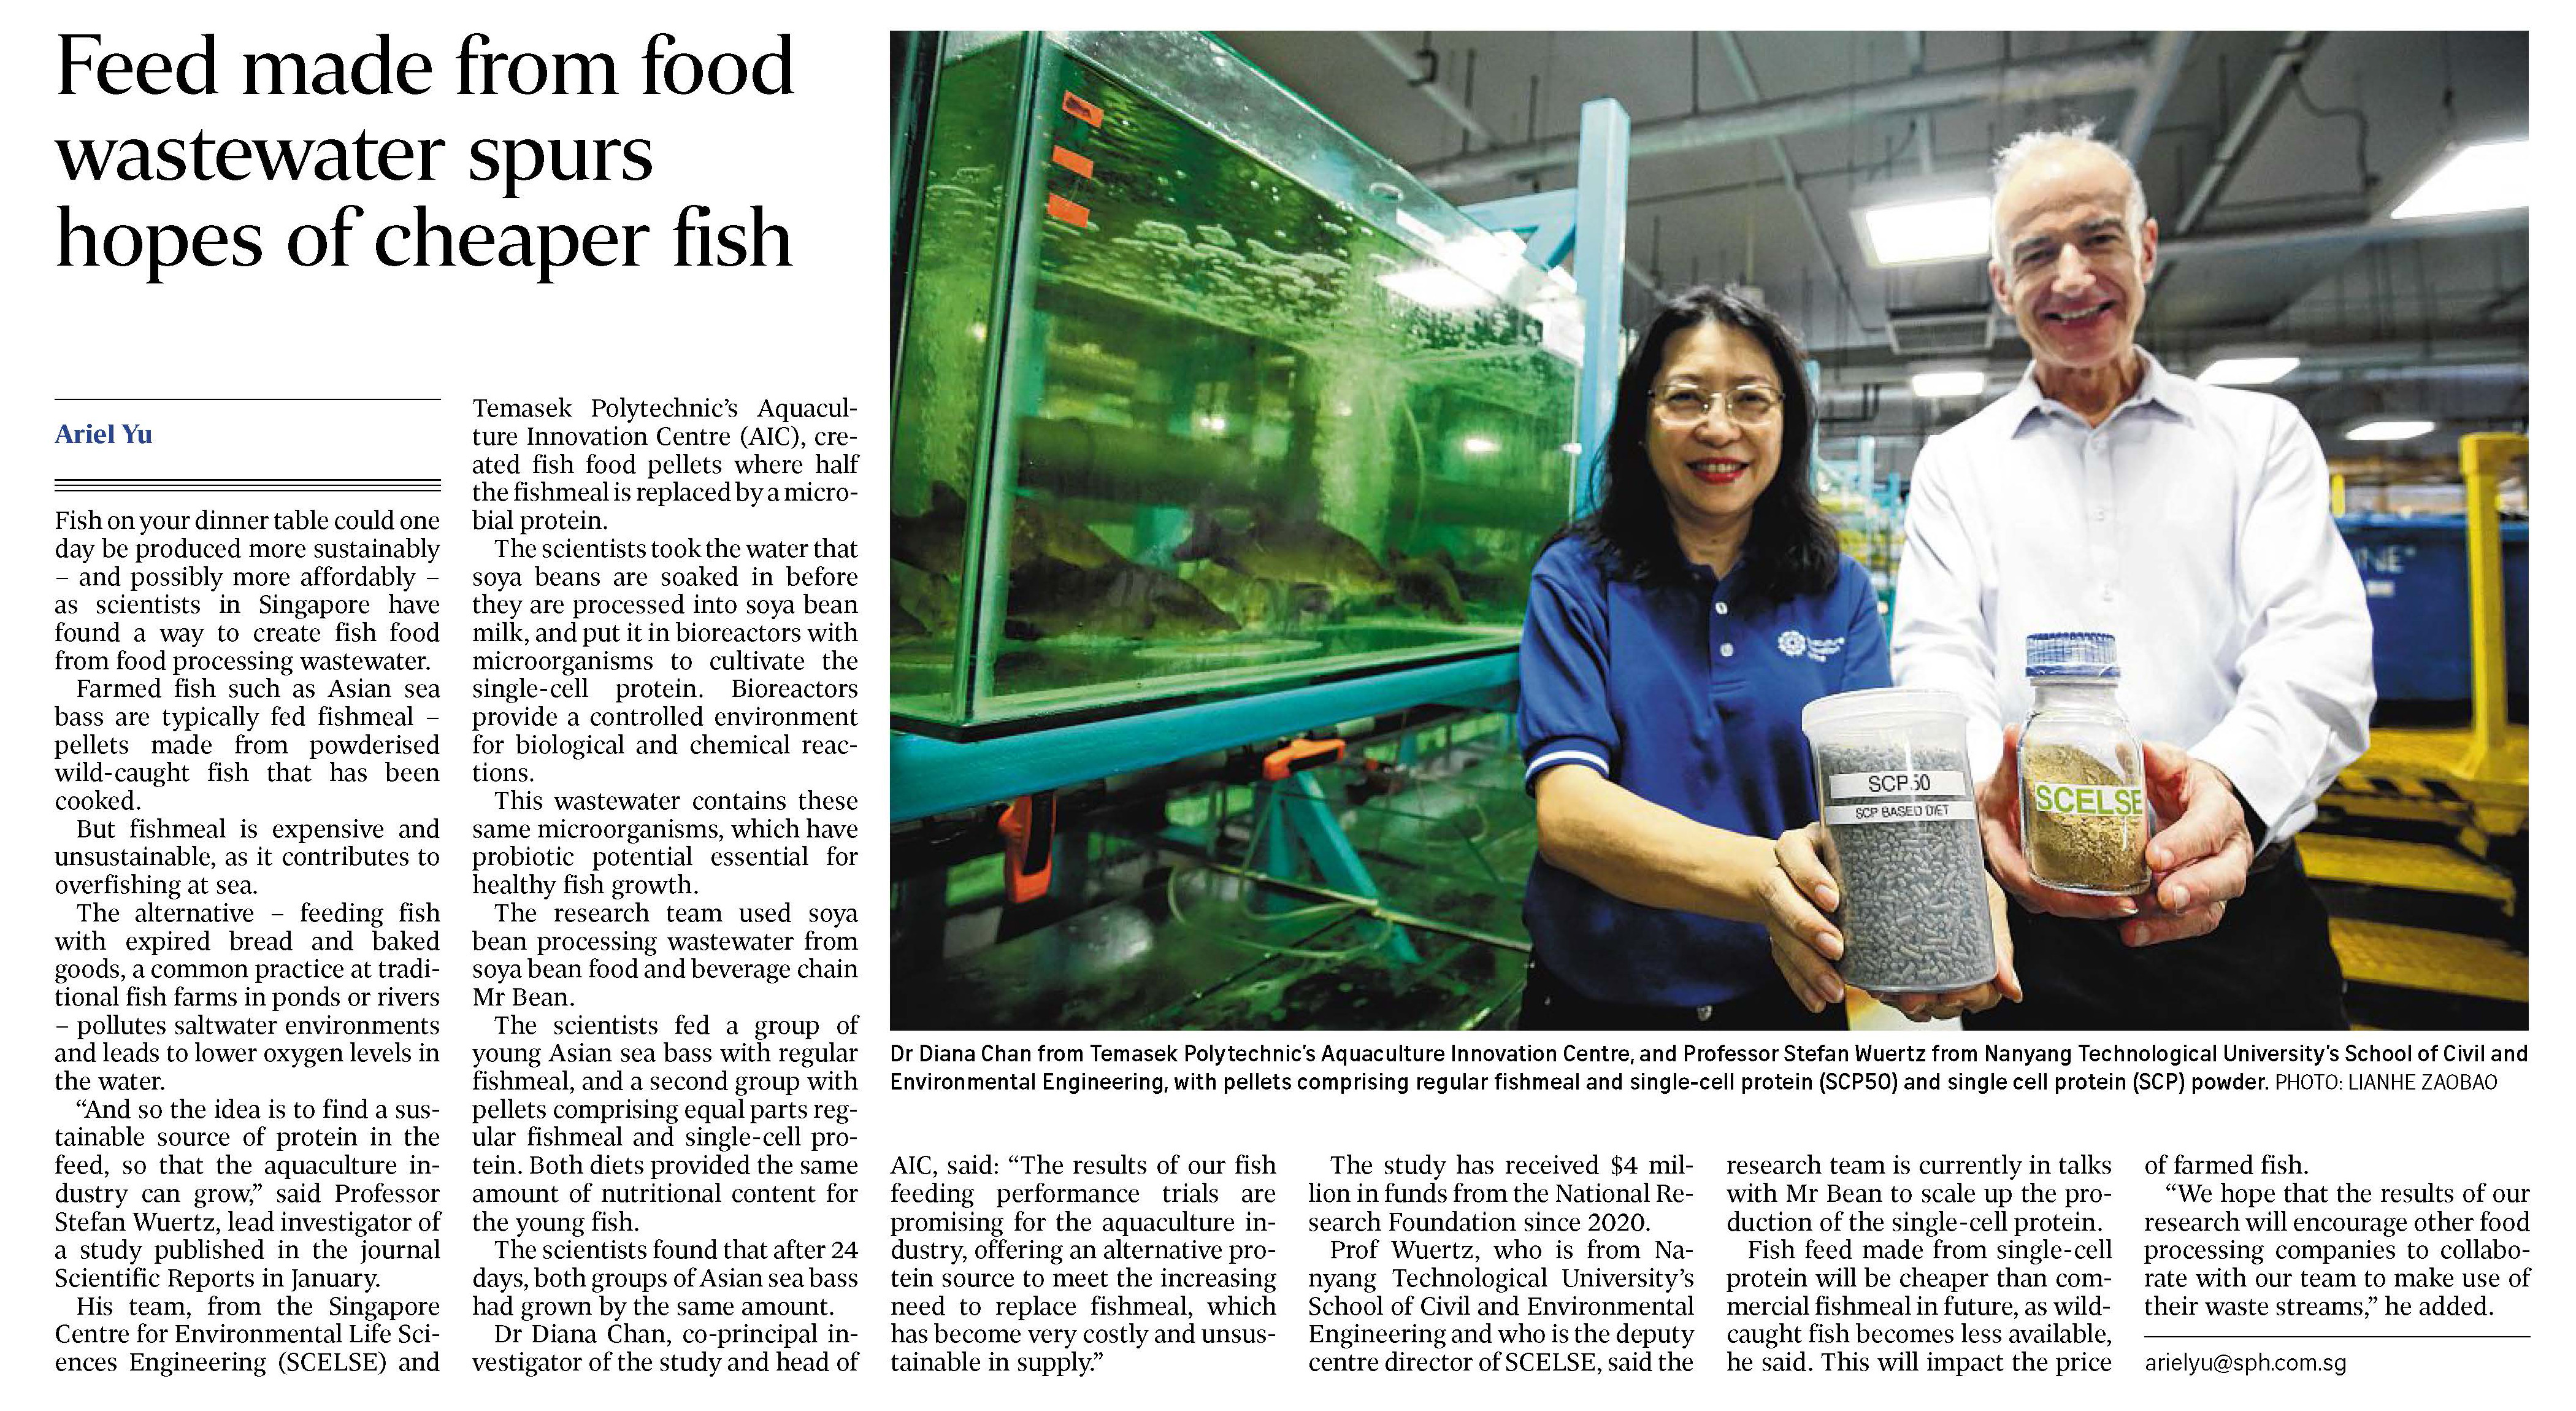 Feed made from food wastewater spurs hopes of cheaper fish 